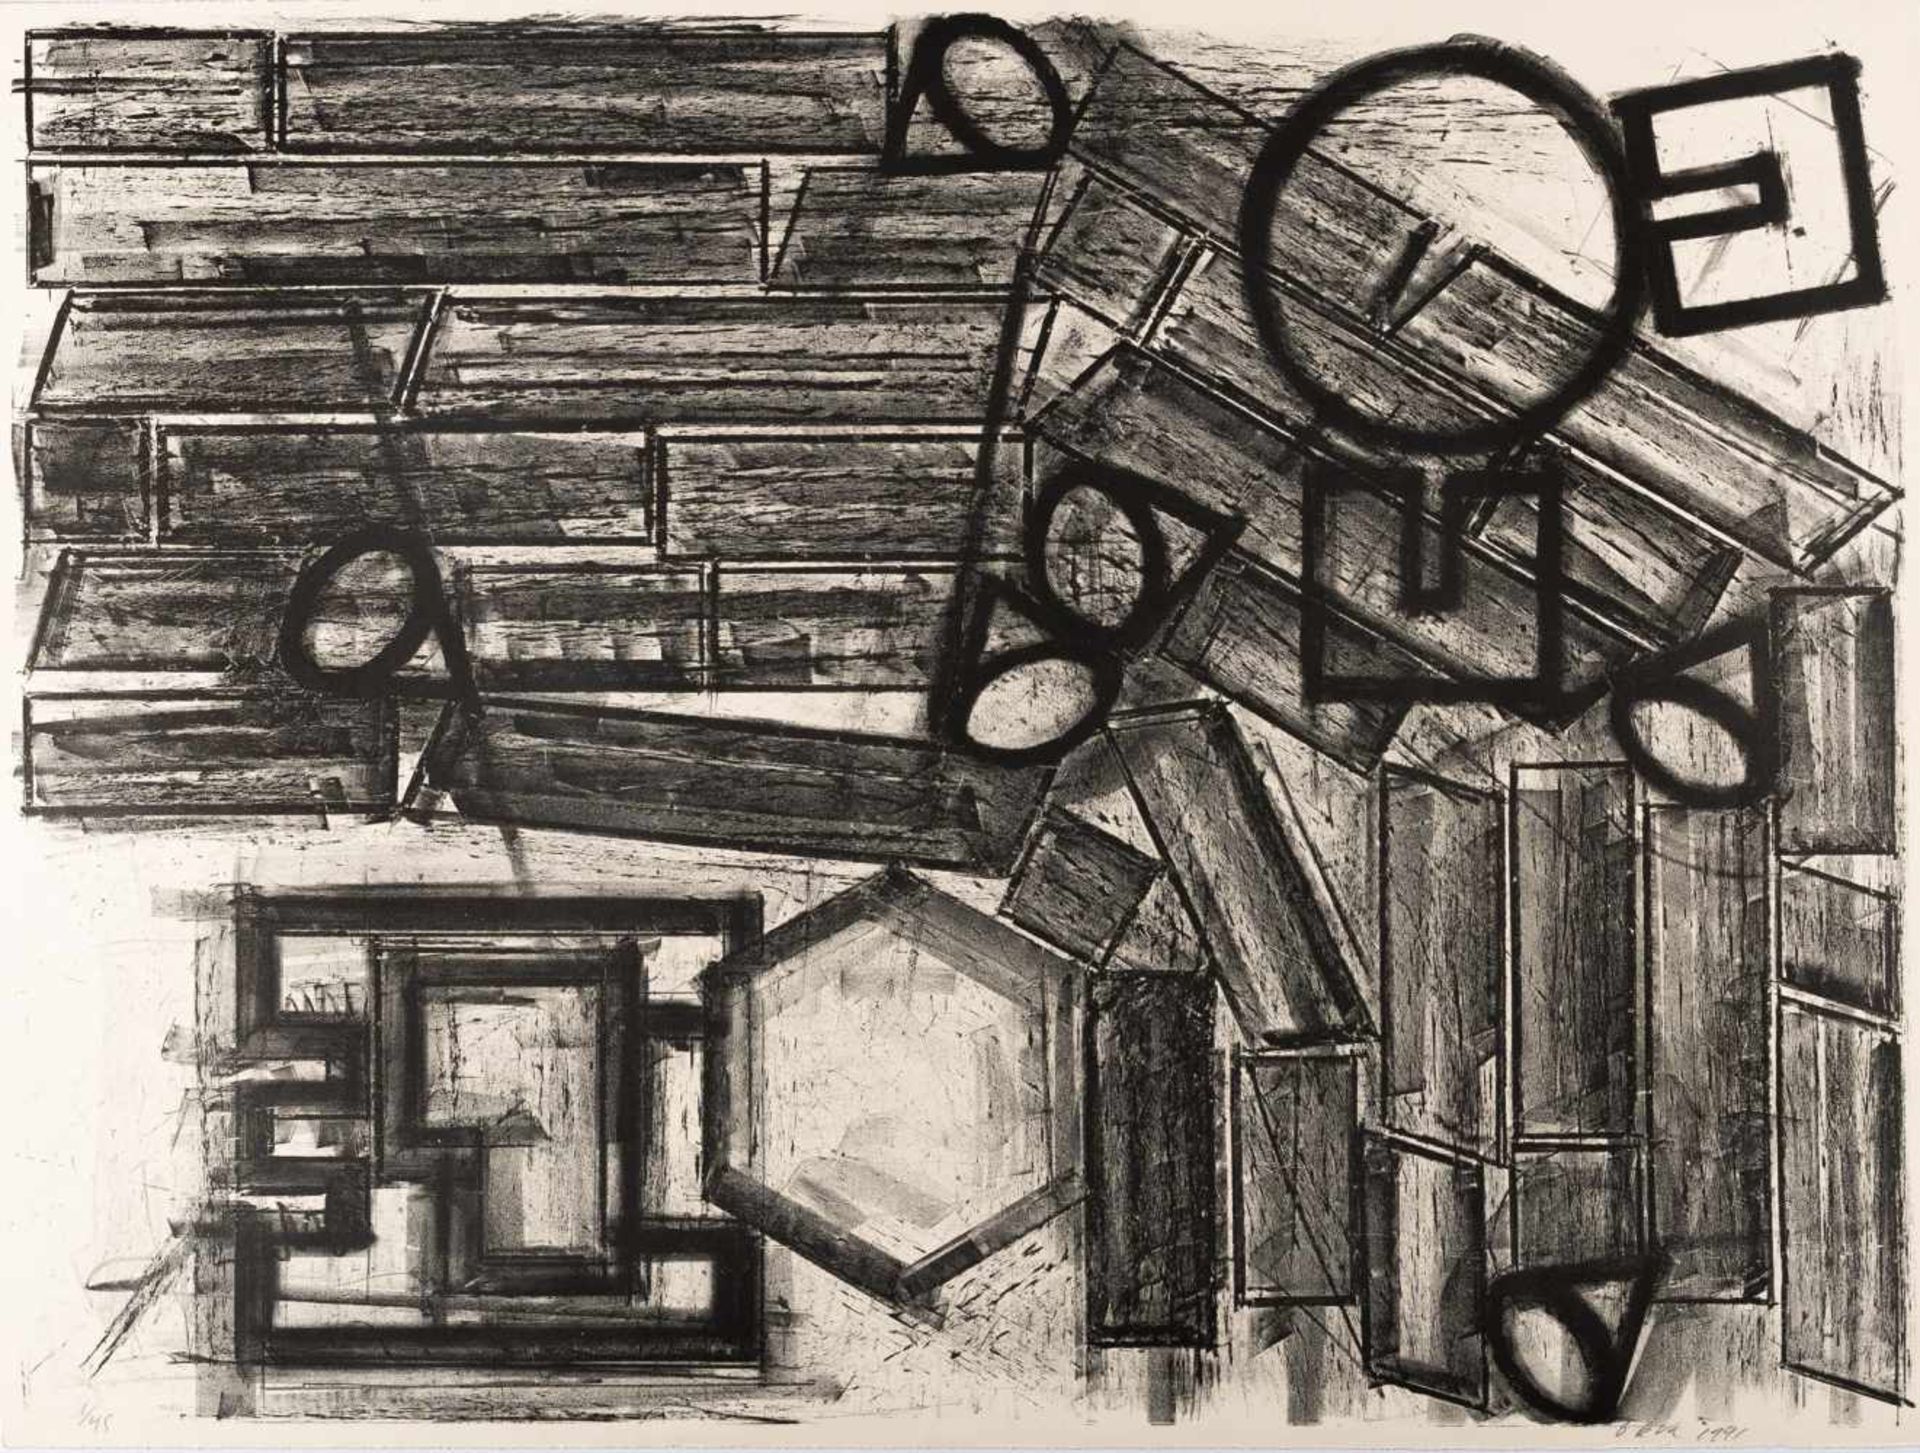 1941 Long BeachPlan View for Sculpture Occupying Wall and Floor AreasLithograph on wove. 1991. C.